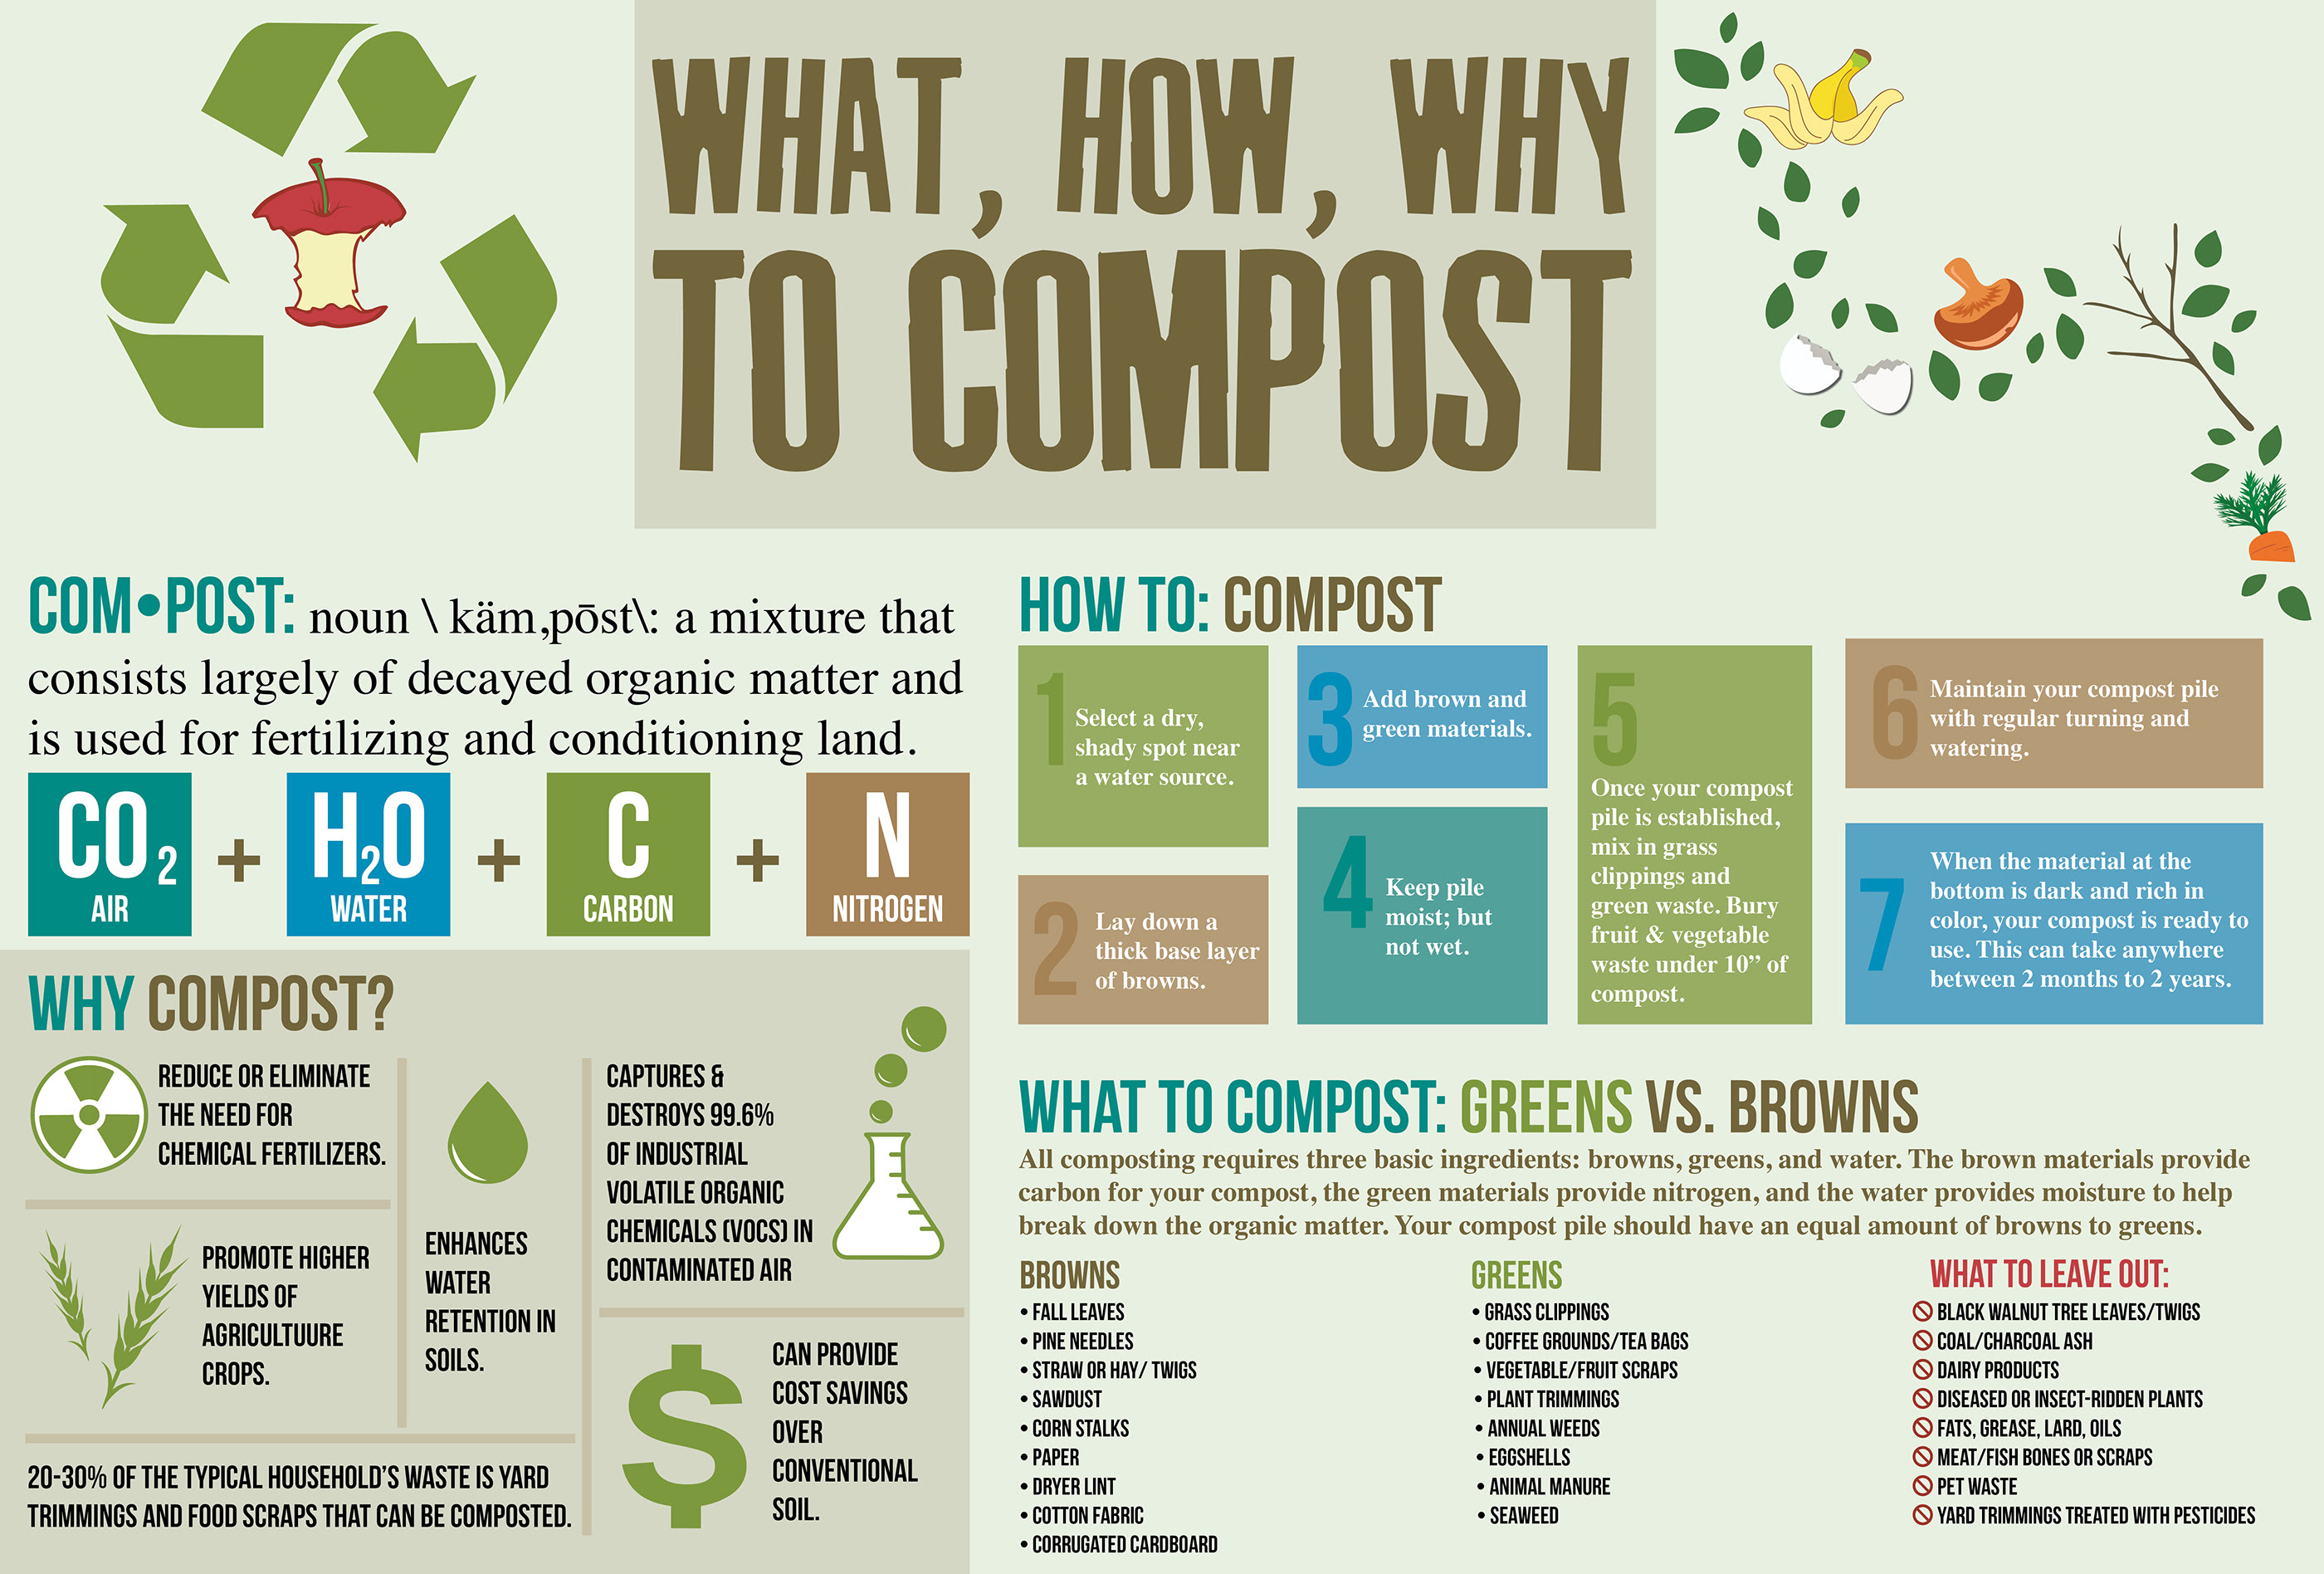 Months between. Making Compost. How to make Compost. To Compost. Compost and Composting food and Yard waste.